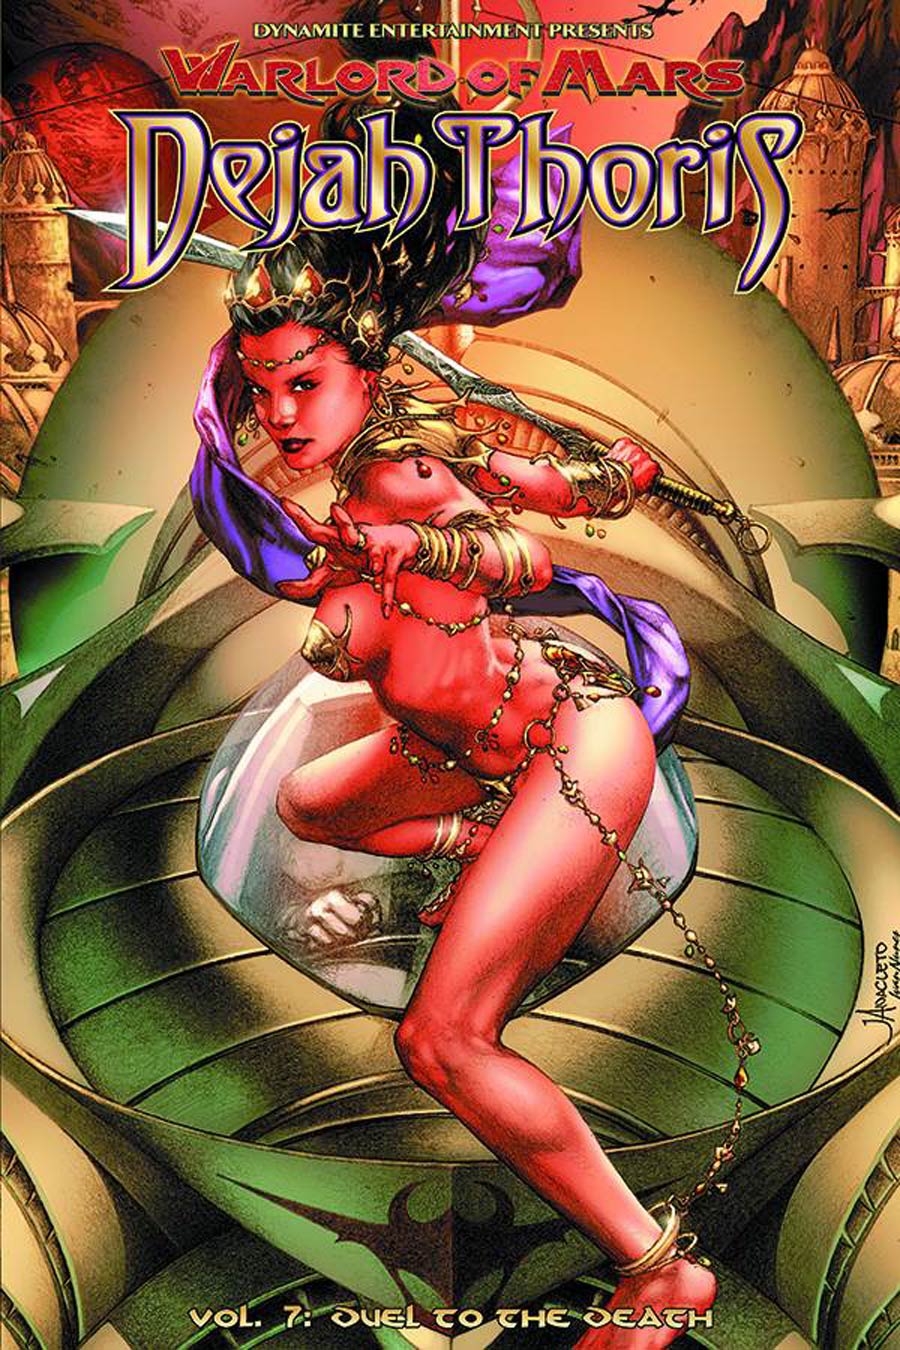 Warlord Of Mars Dejah Thoris Vol 7 Duel To The Death TP